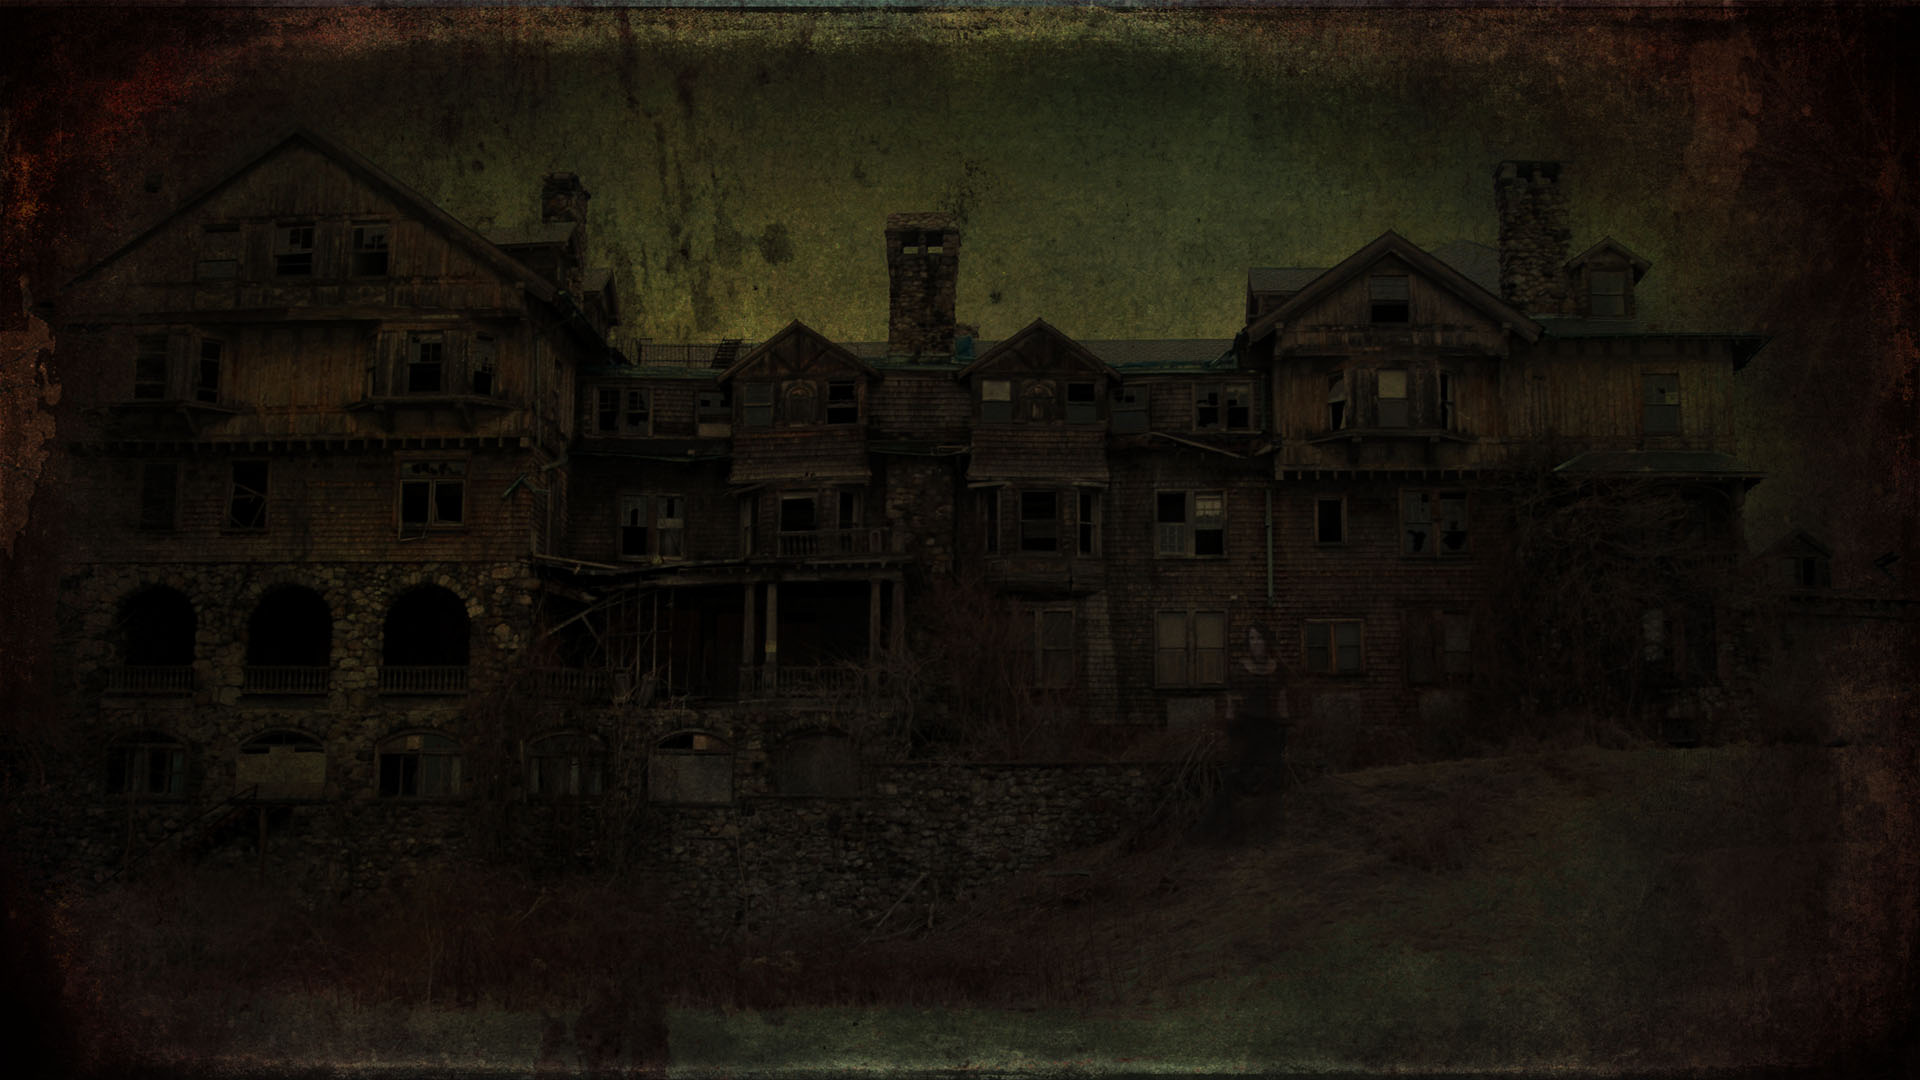 Haunted House Spooky Ghost 1920x1080